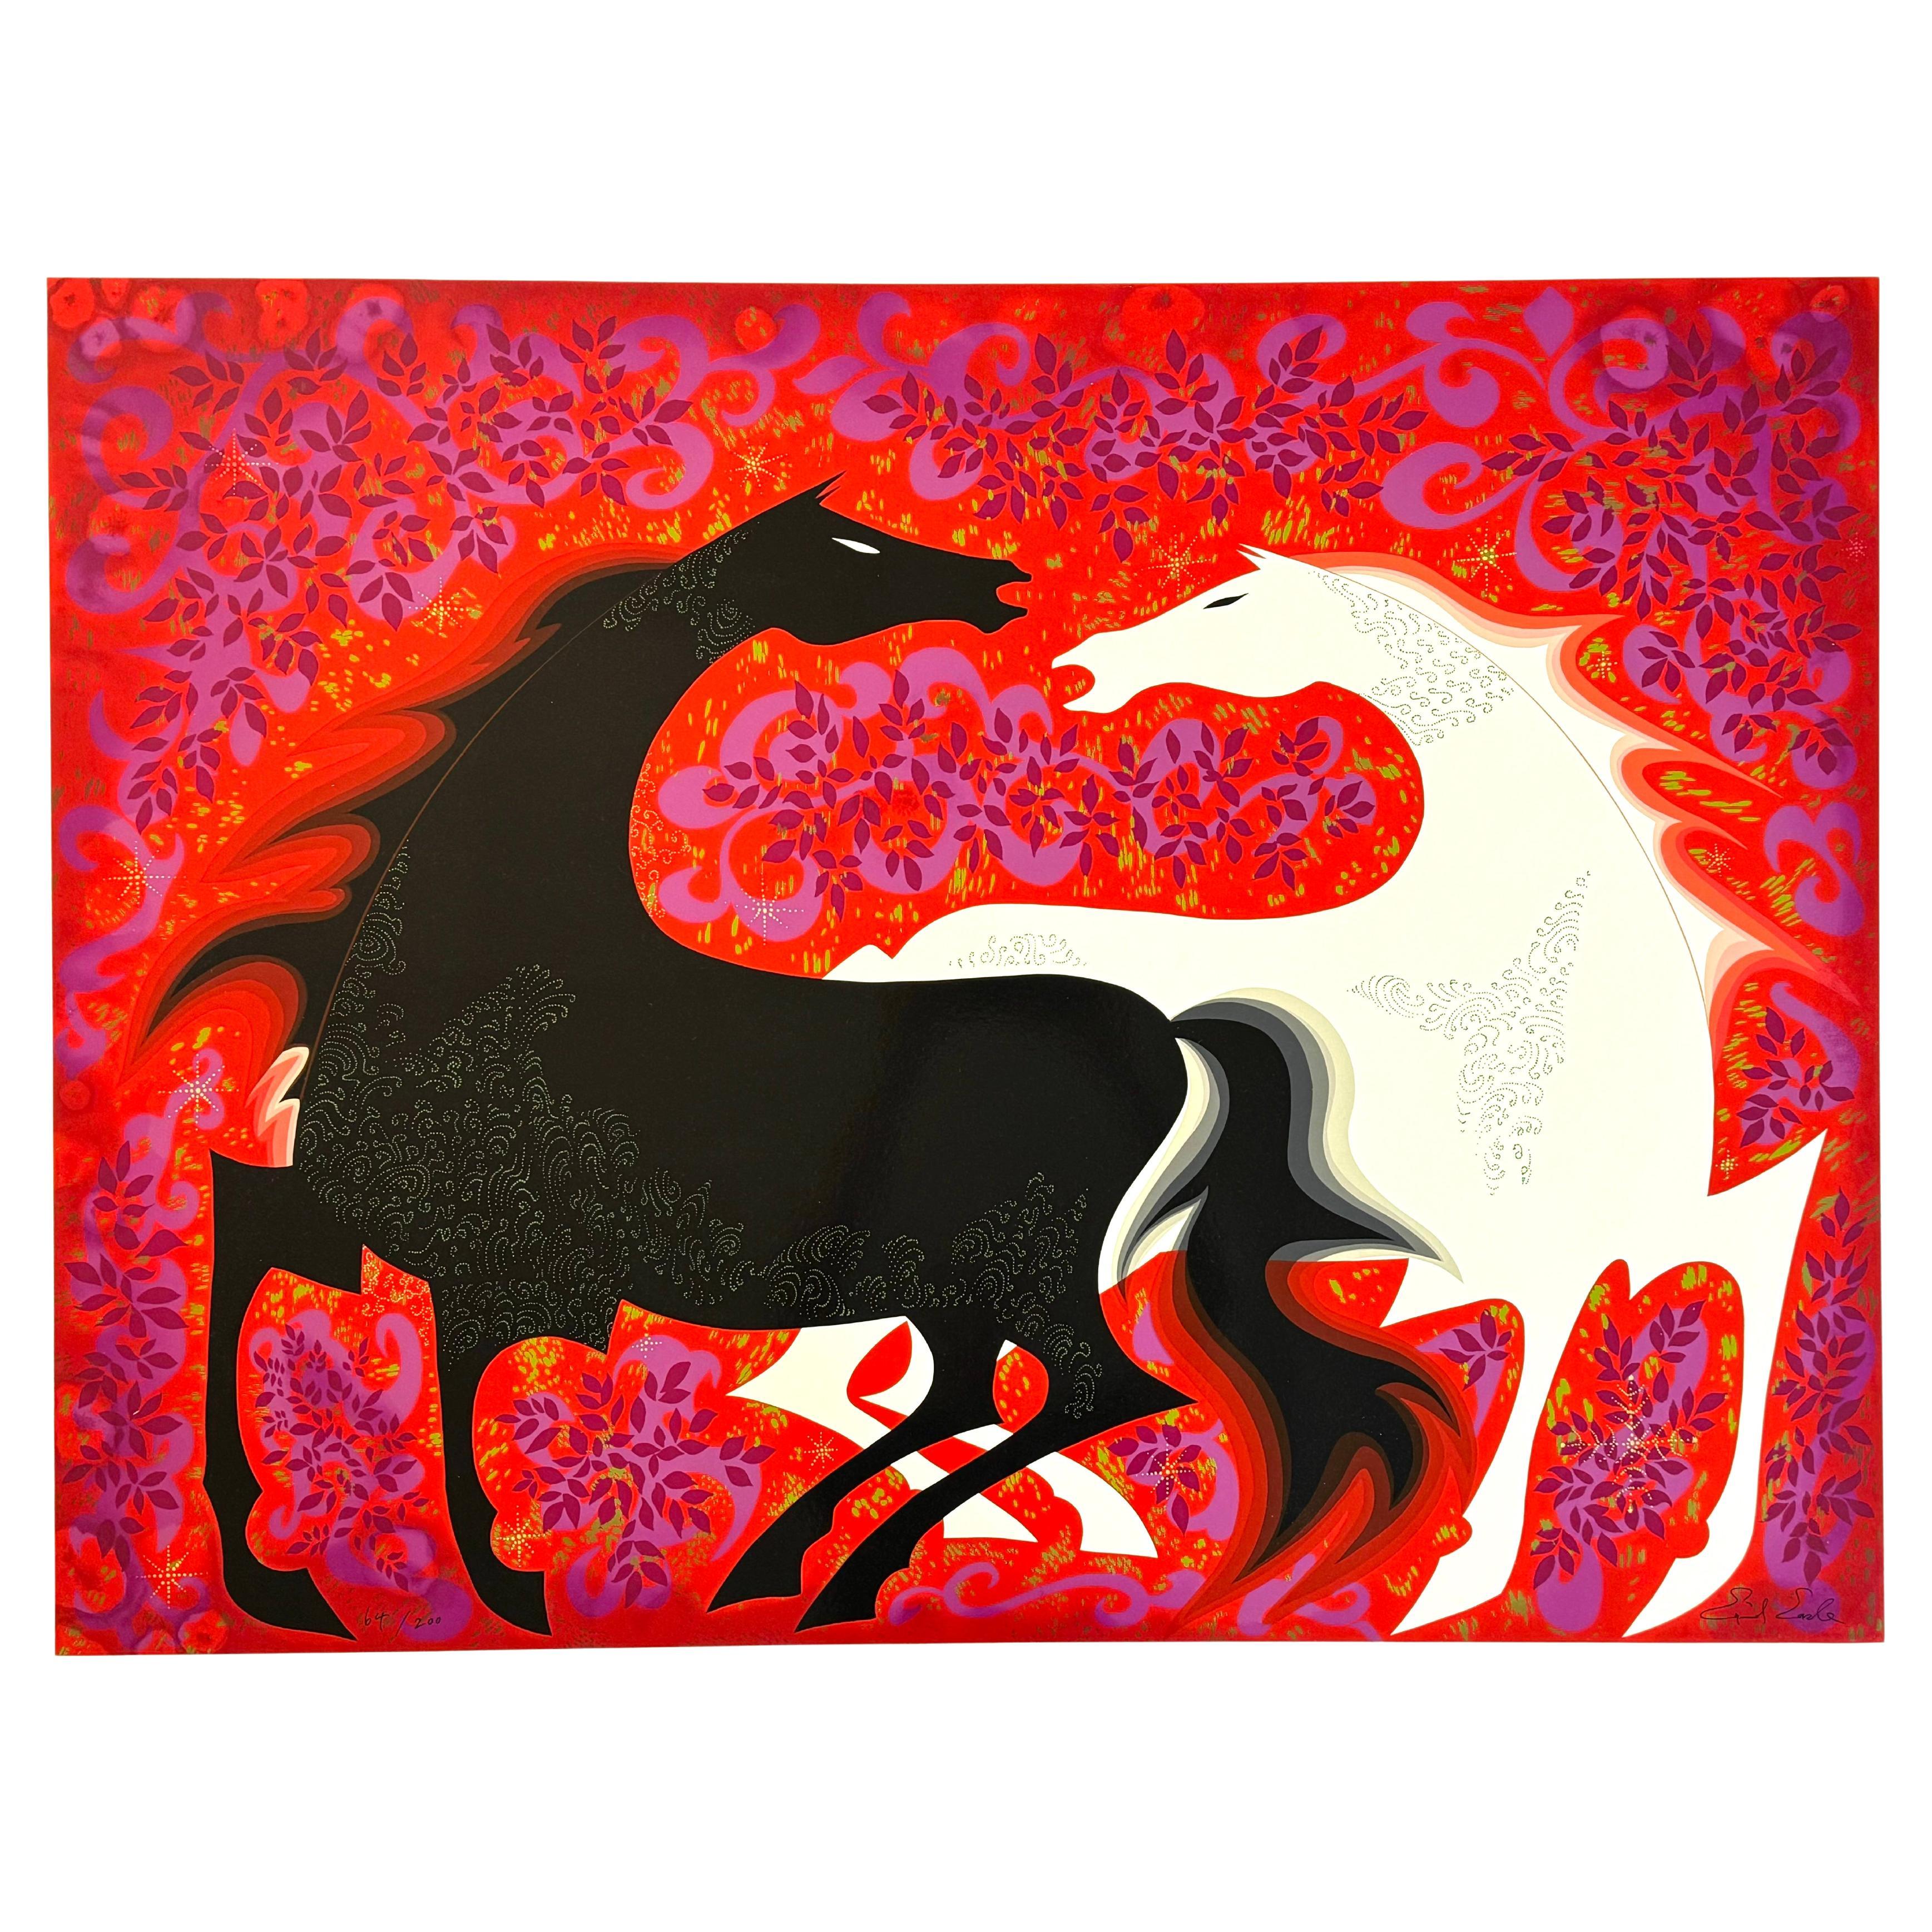 Two Wild Horses, Limited Edition Serigraph on Paper, 1998, Eyvind Earle